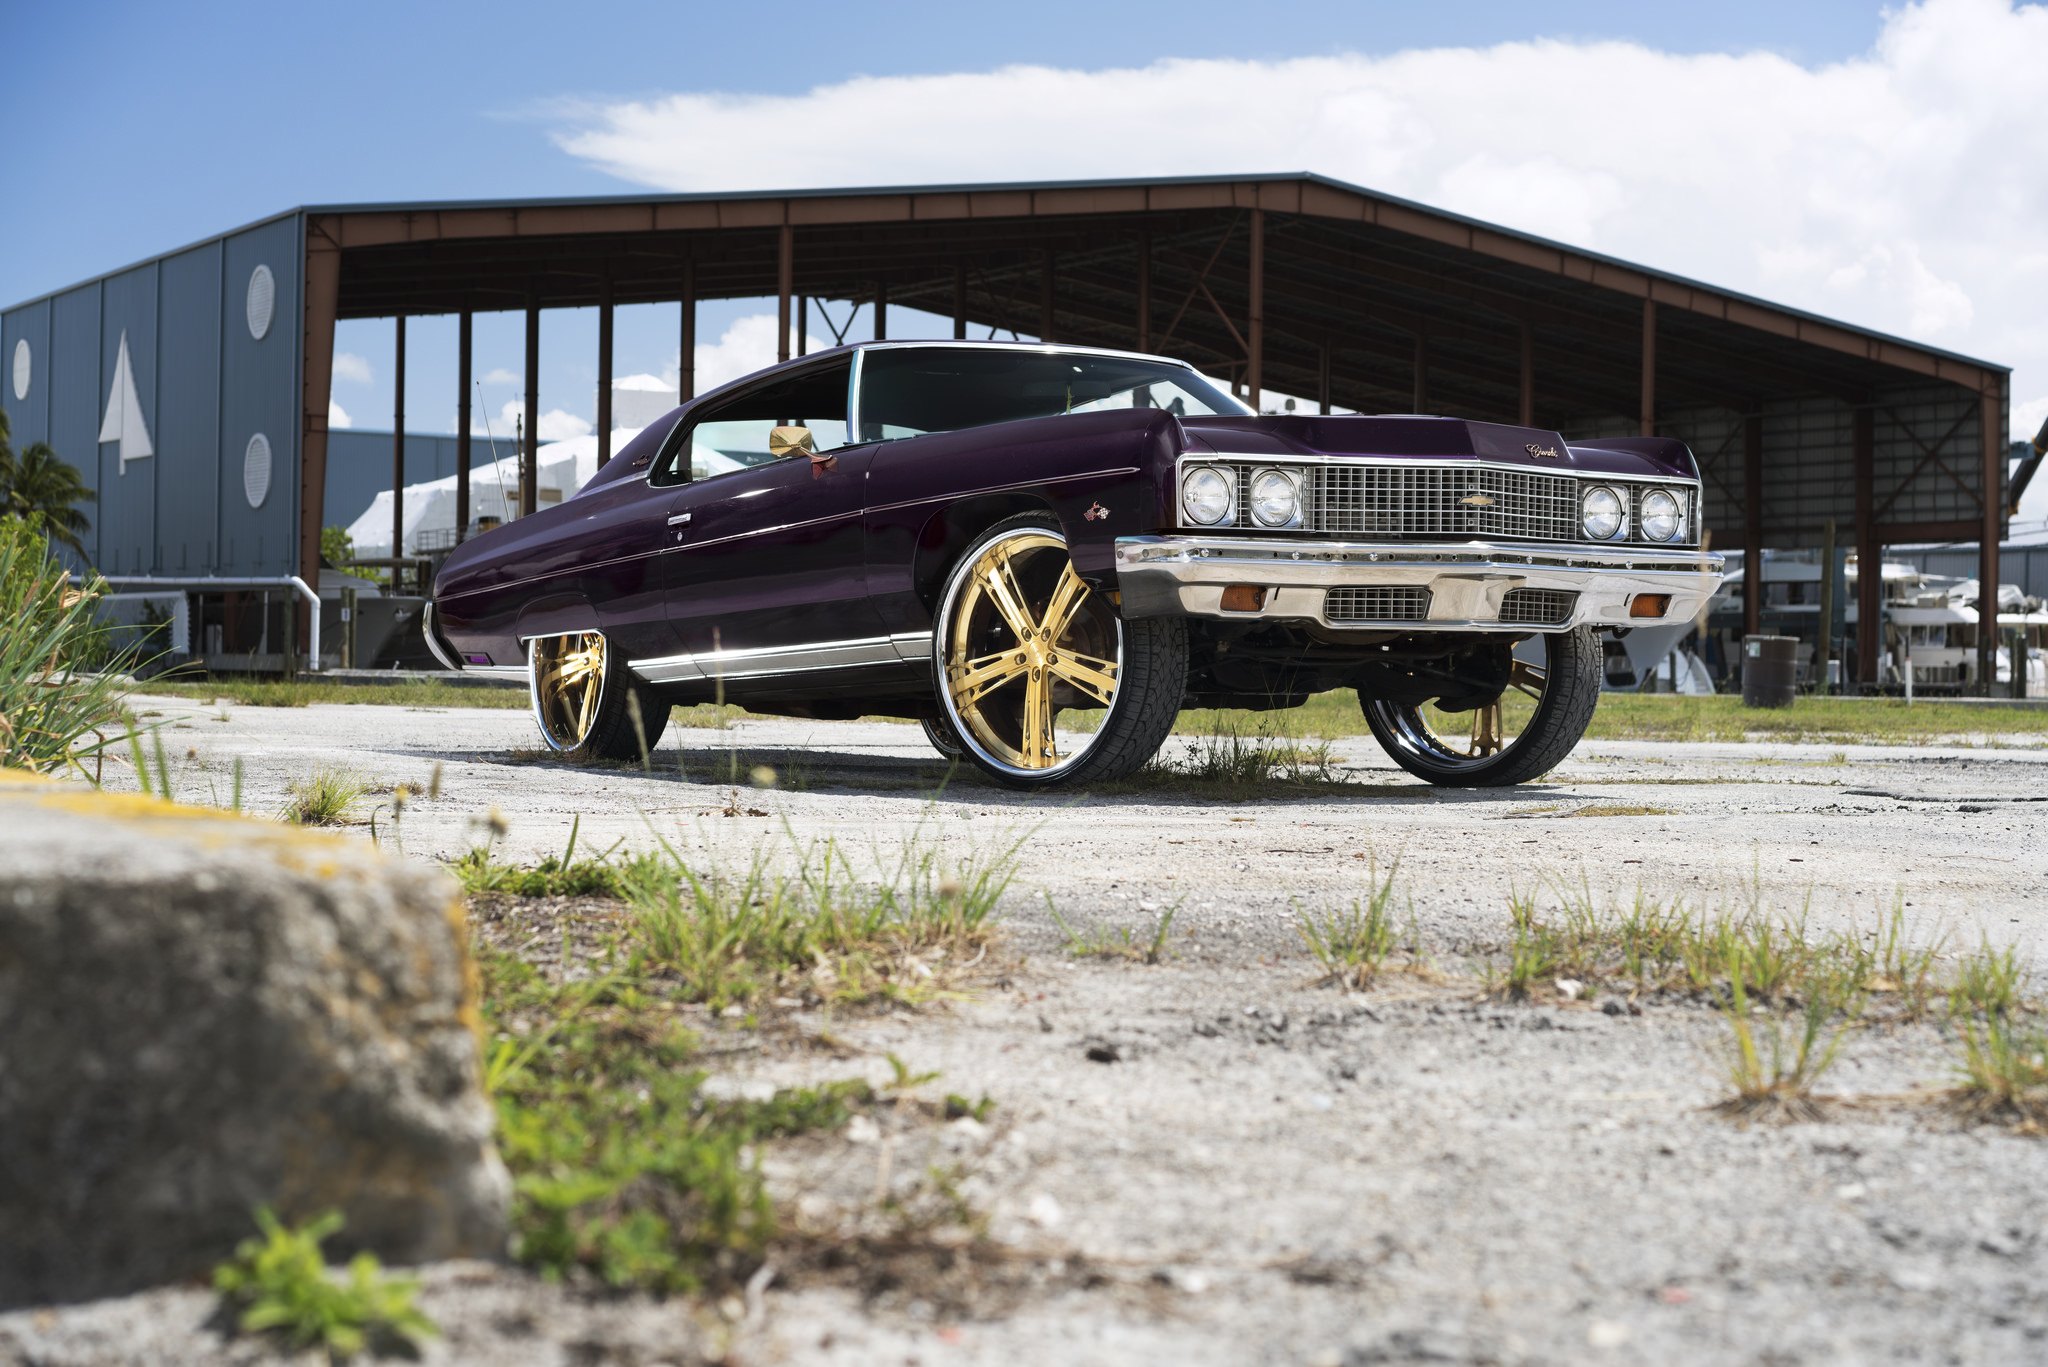 Lifted Purple Chevy Impala on Gold Wheels - Photo by DUB